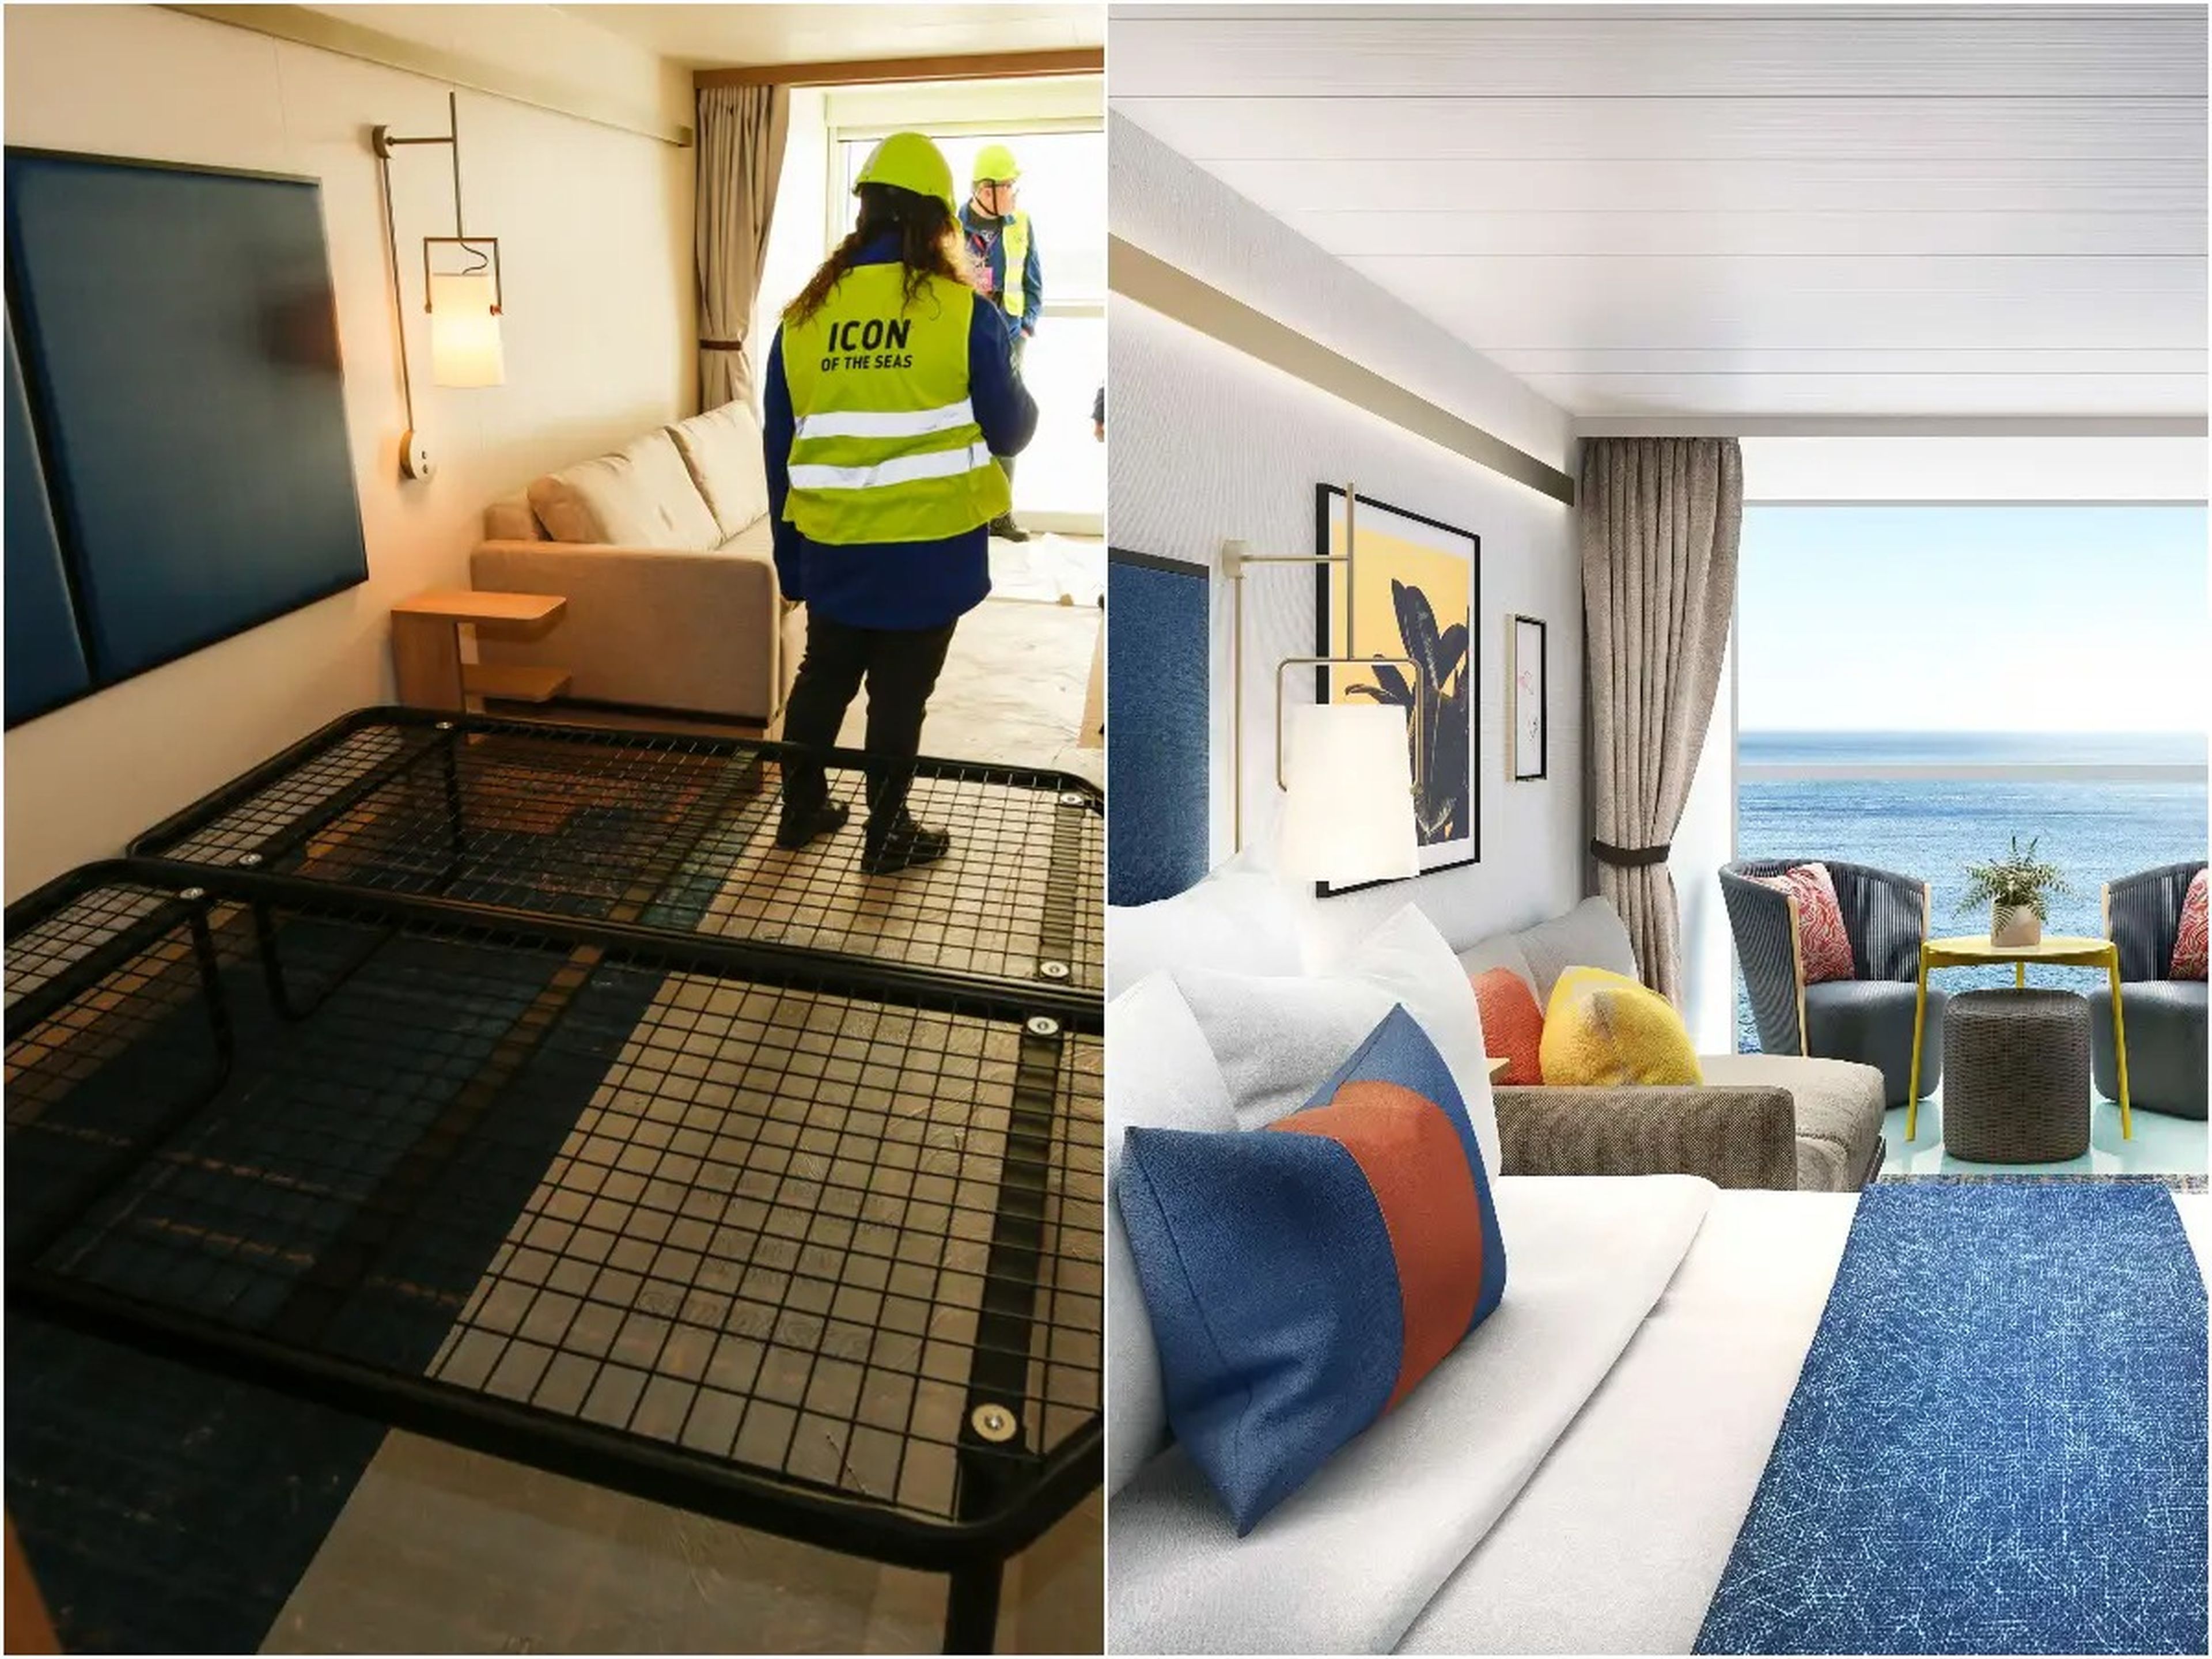 A collage of the rendering of the family infinite ocean view balcony stateroom with what it looks like under construction.